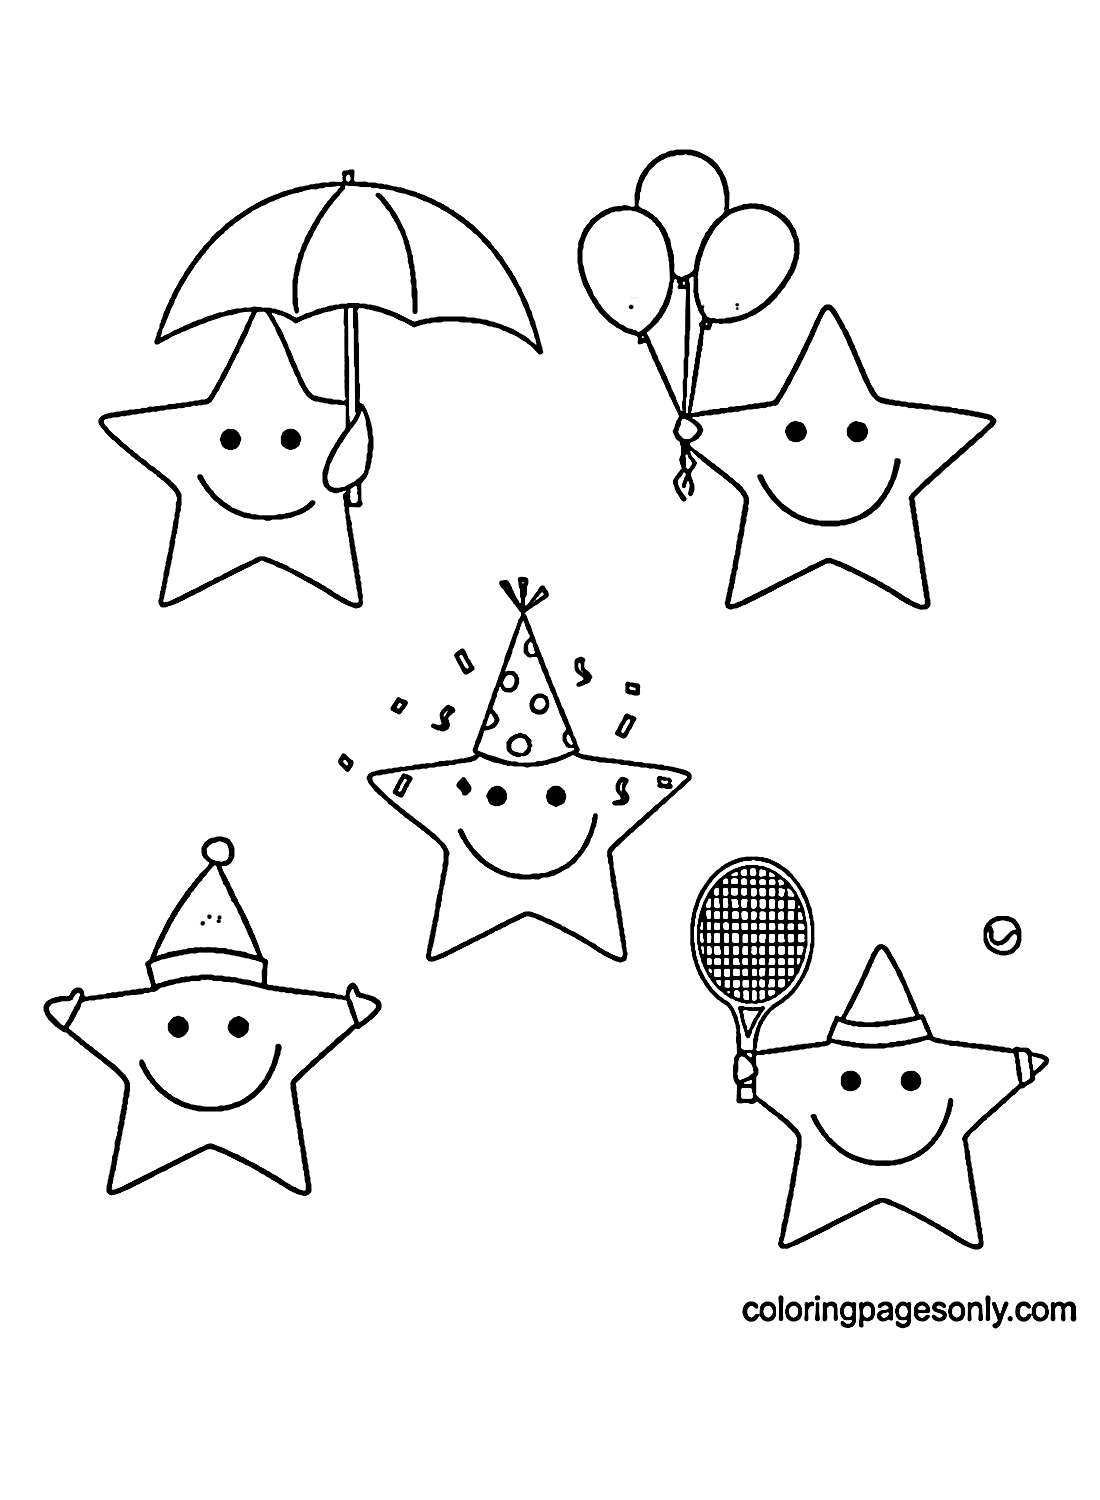 Fun Stars Coloring Pages